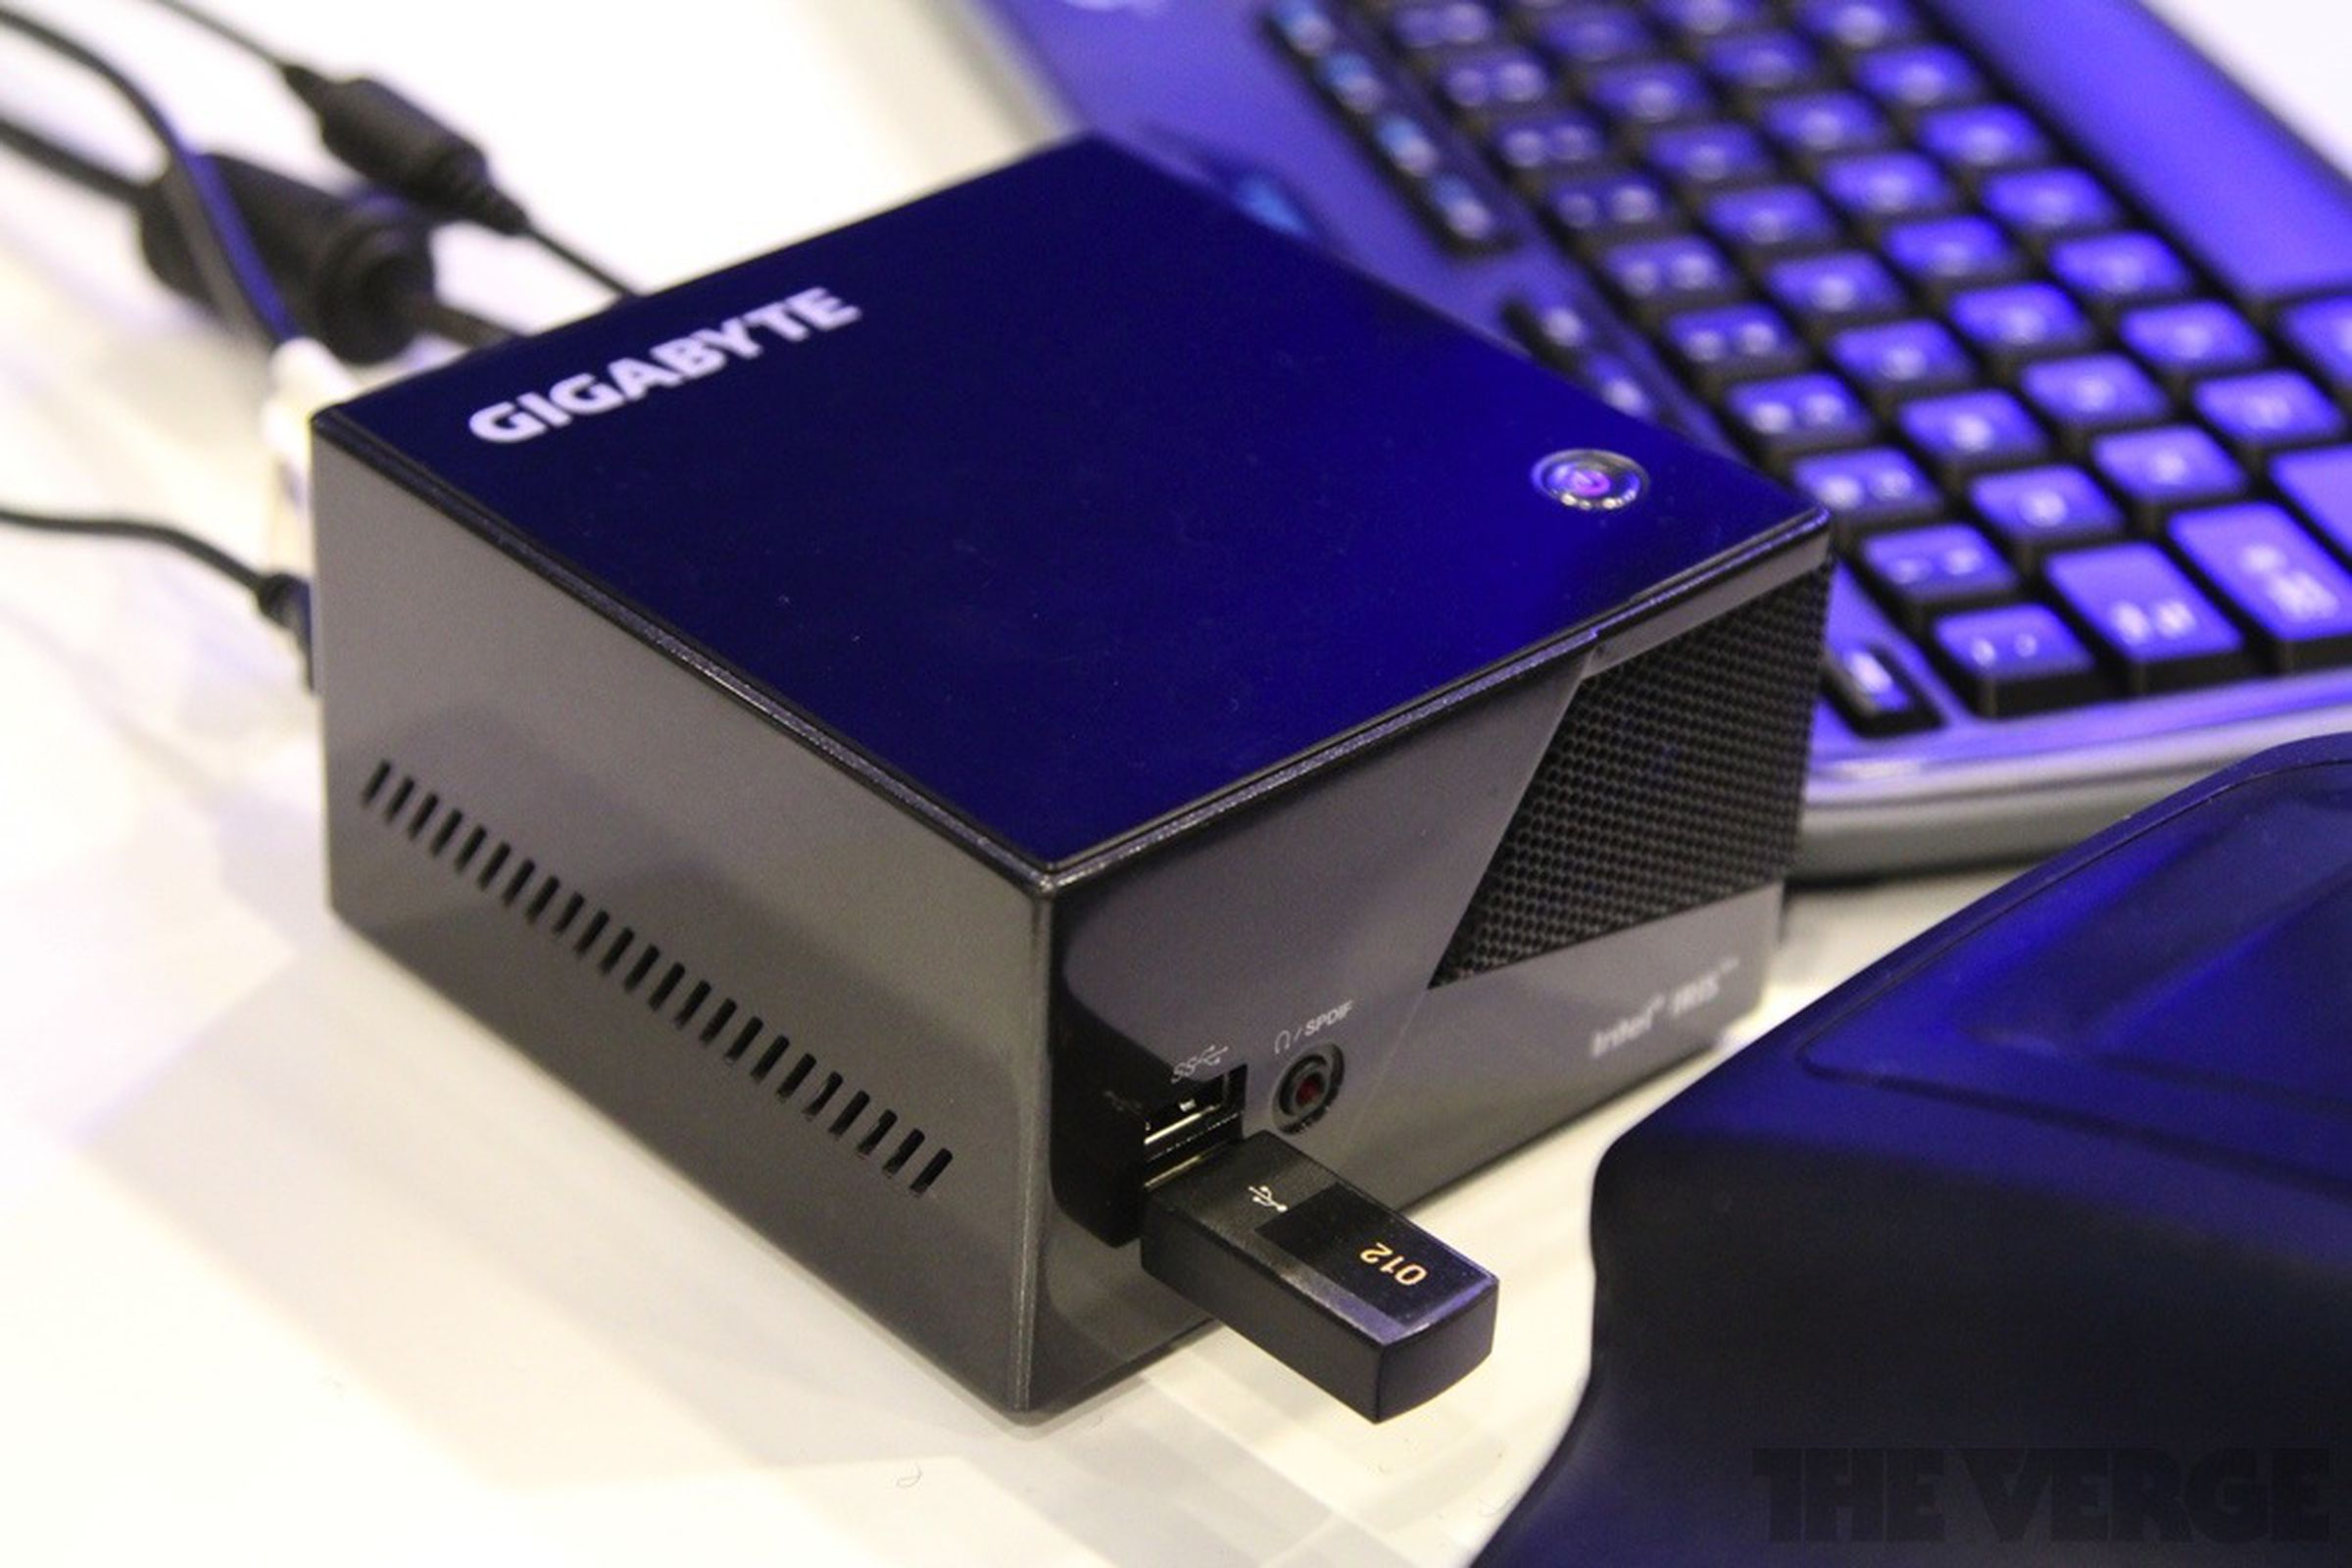 Gallery Photo: Gigabyte Brix II hands-on pictures